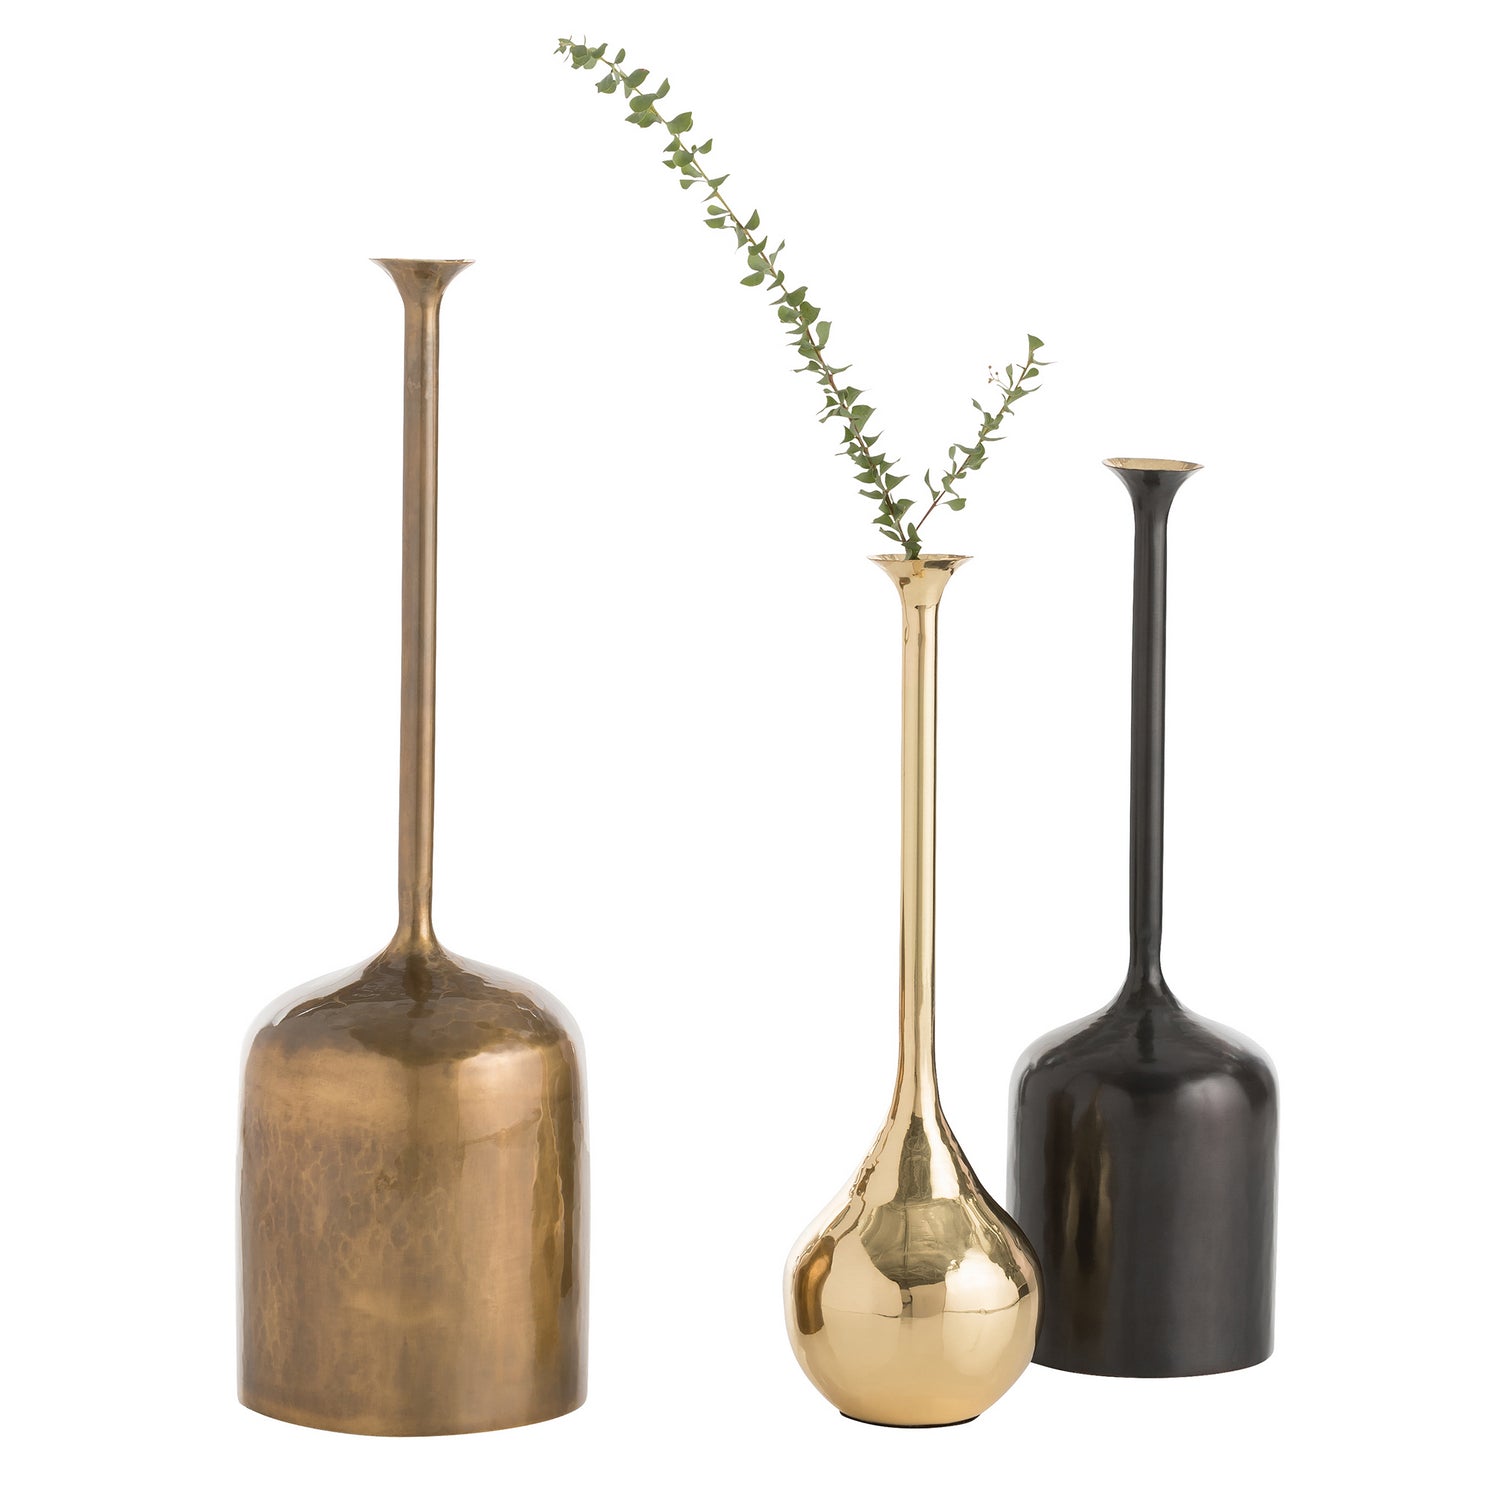 Vessels S/3 from the Harris collection in Polished Brass finish